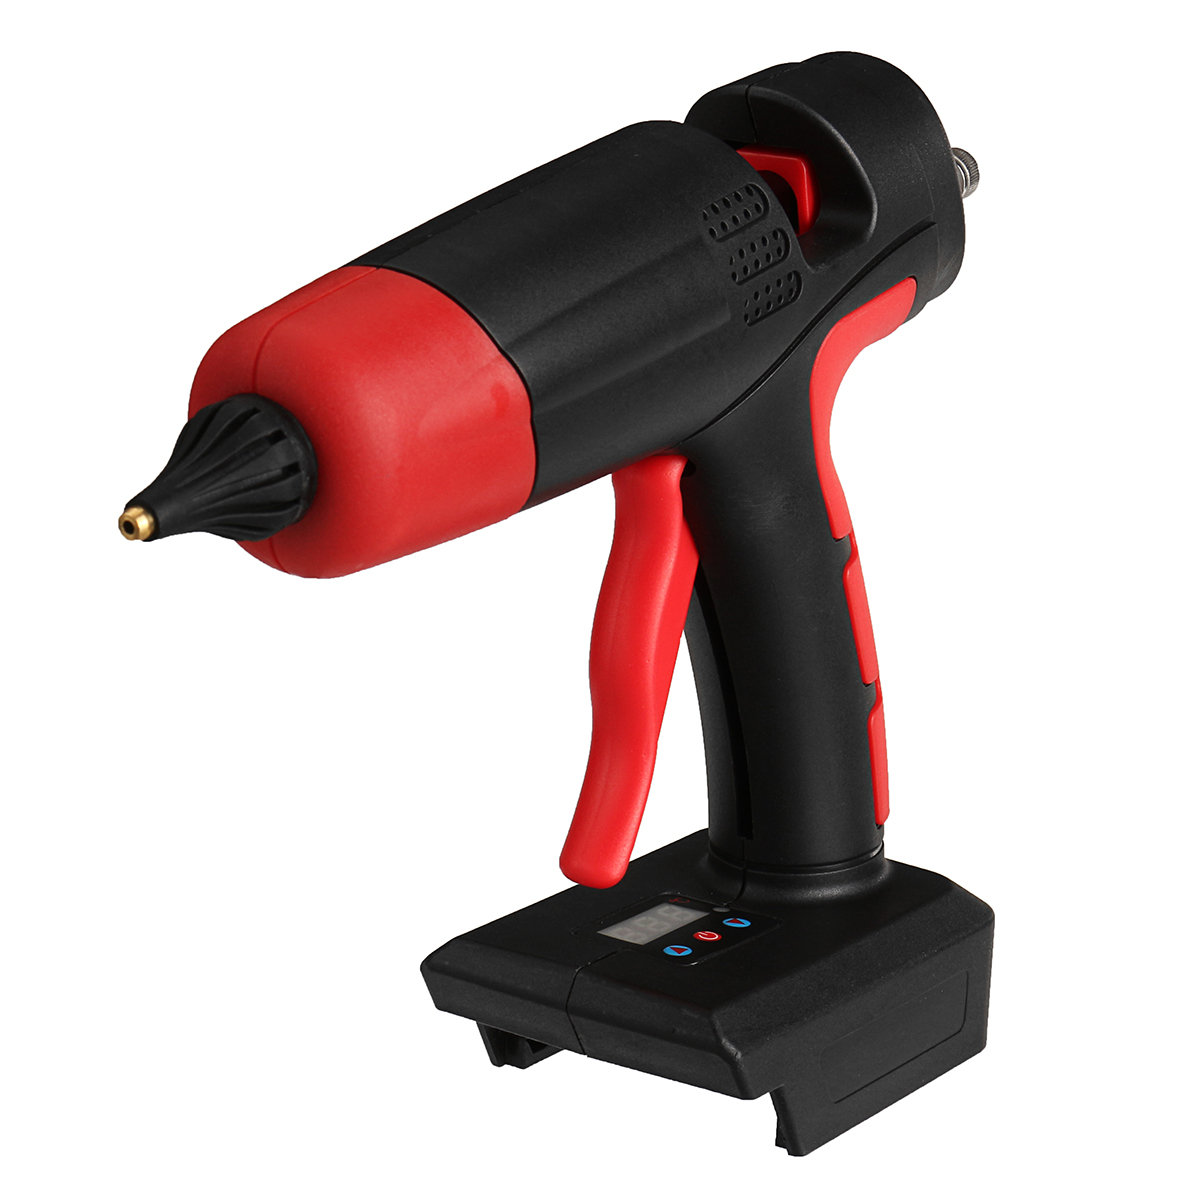 Find VIOLEWORKS Hot Melt Glue Guns Cordless Rechargeable Hot Glue Applicator Home Improvement Craft DIY Tool For Makita18V Battery for Sale on Gipsybee.com with cryptocurrencies